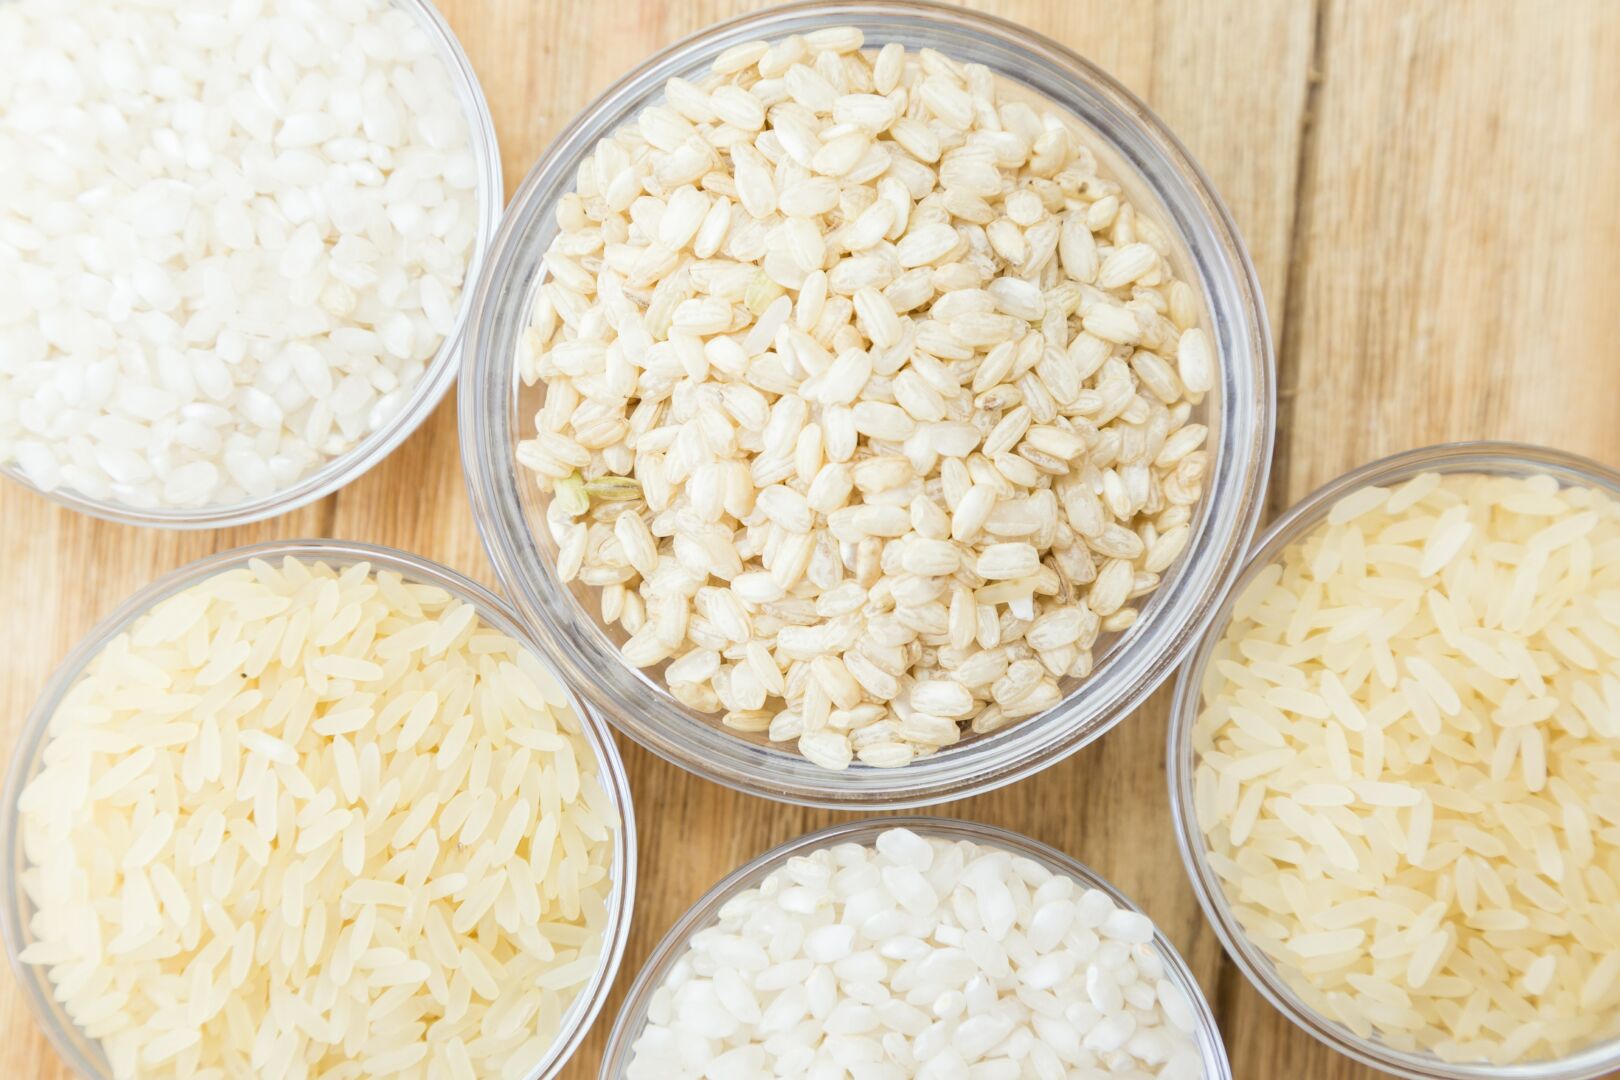 Our Products: Extra Long Grain Parboiled Rice